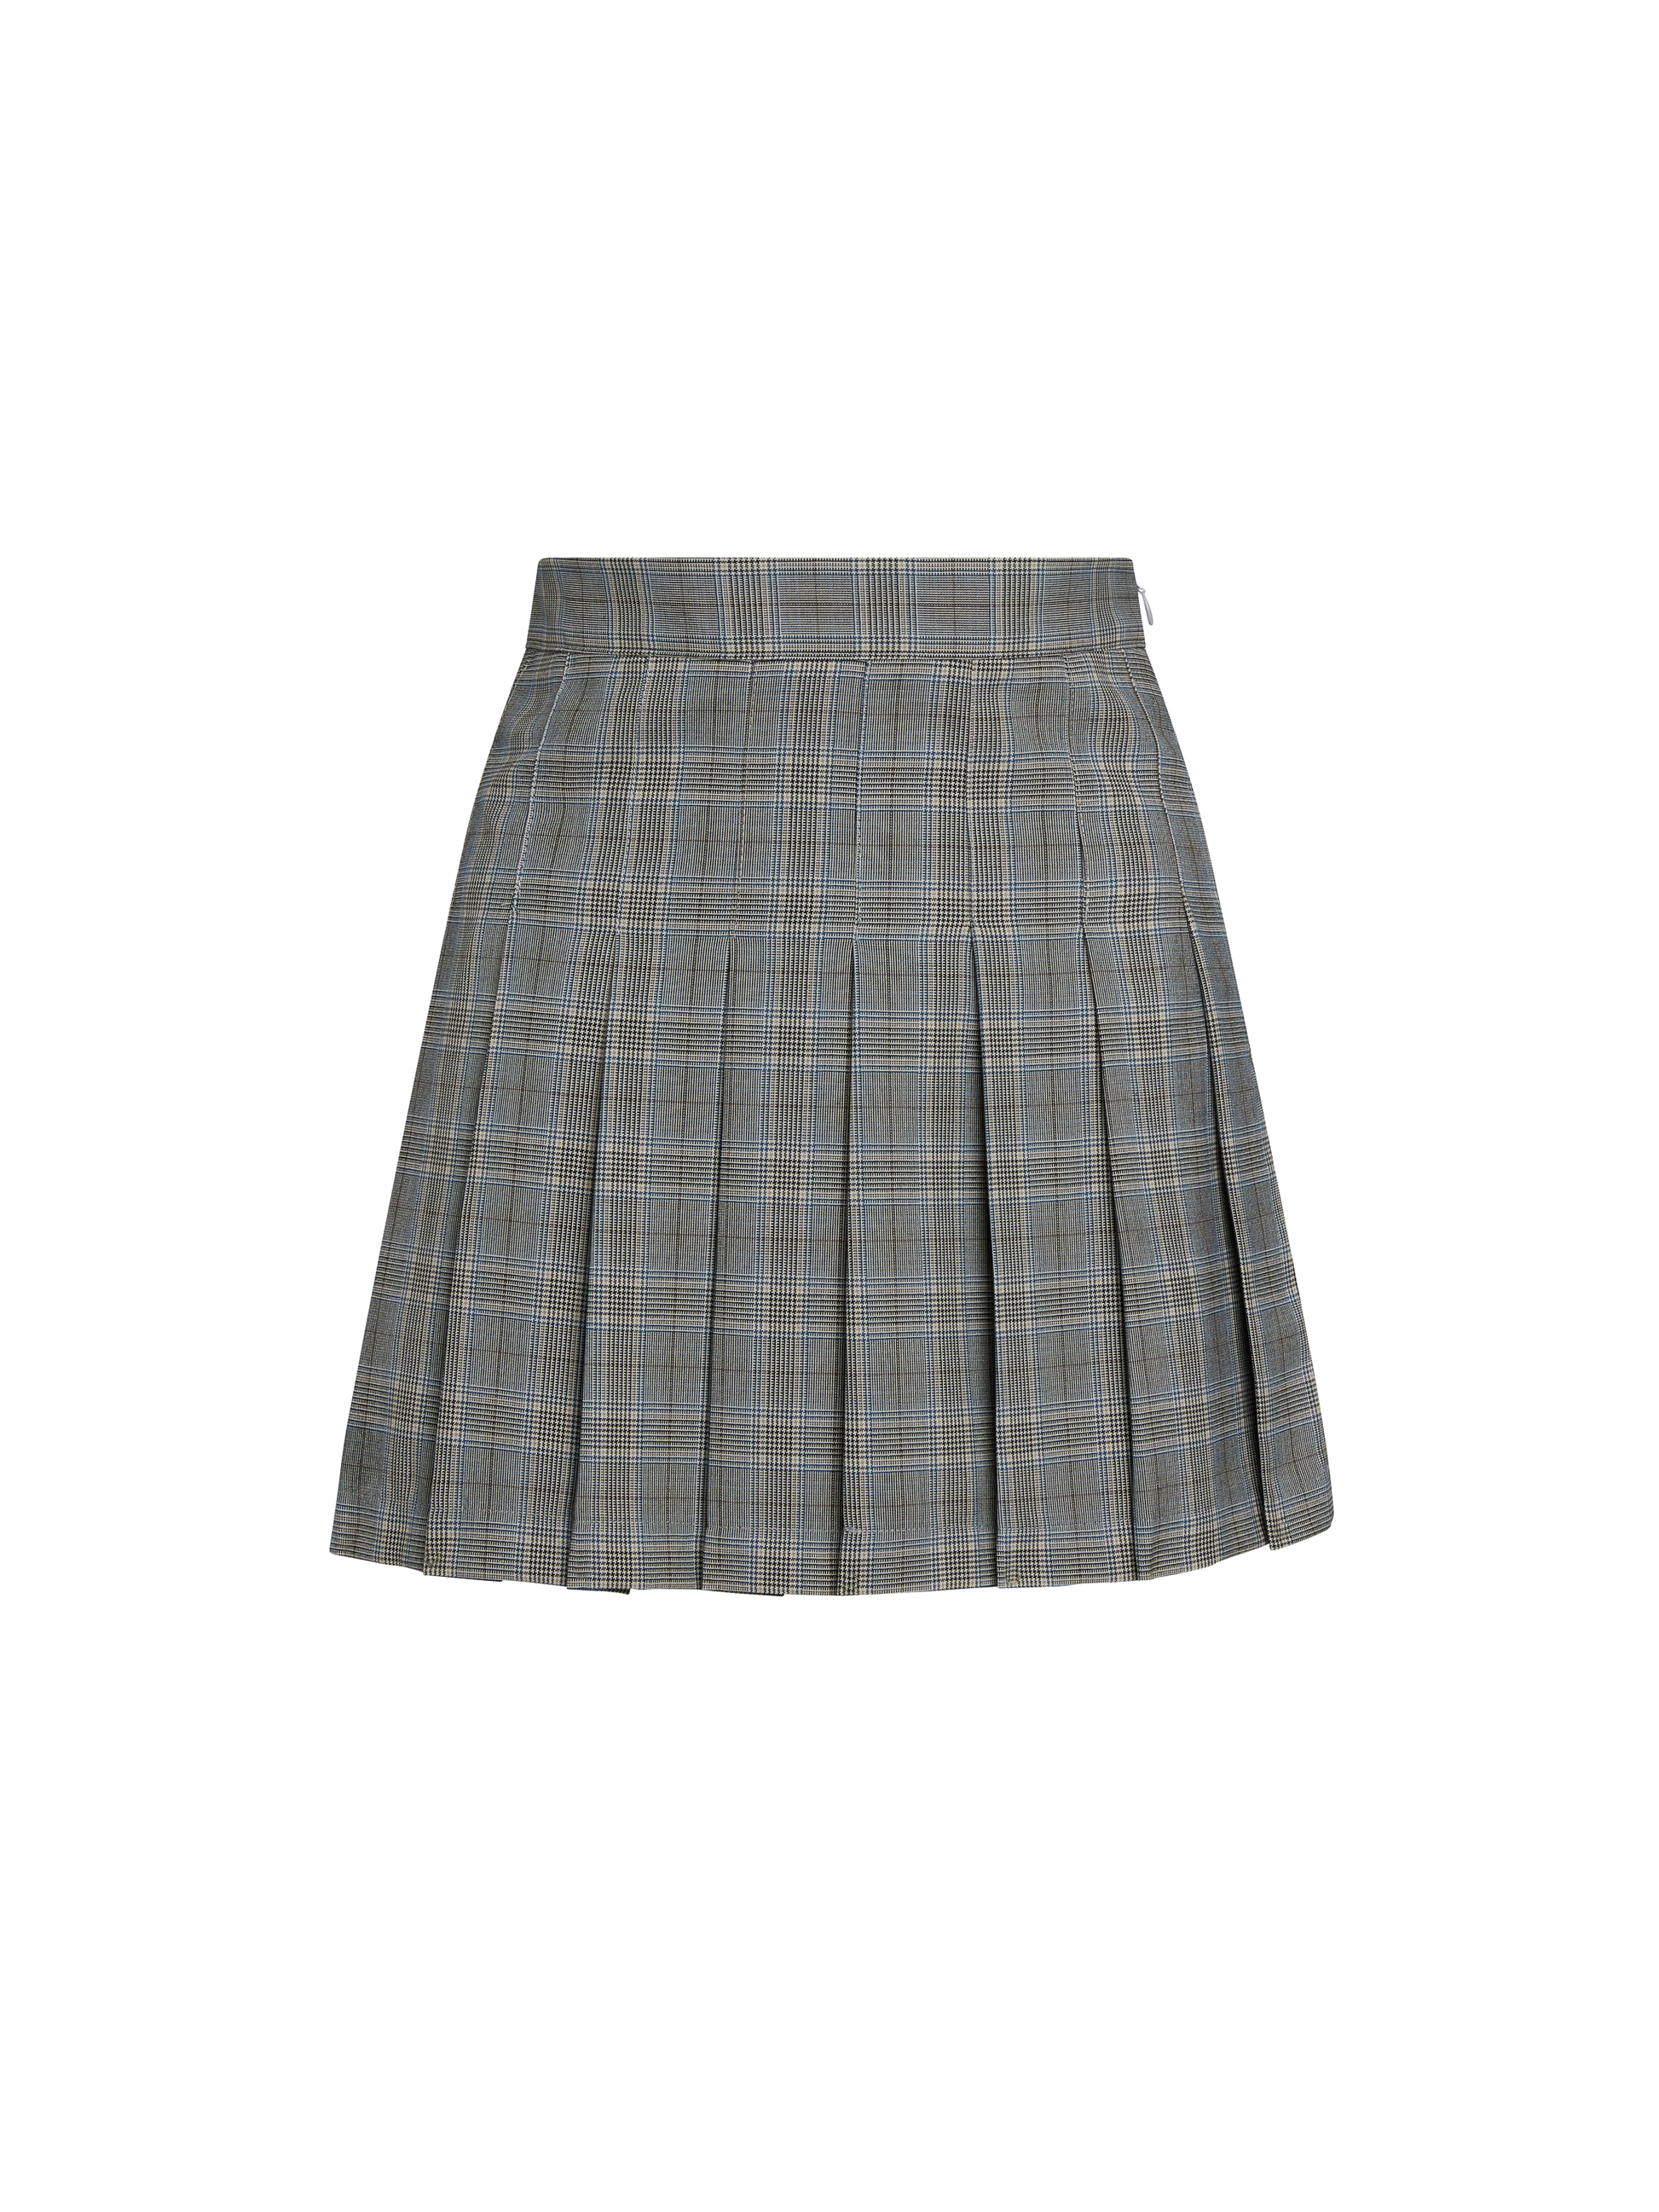 oxfords with pleated tartan skirt and knitted top